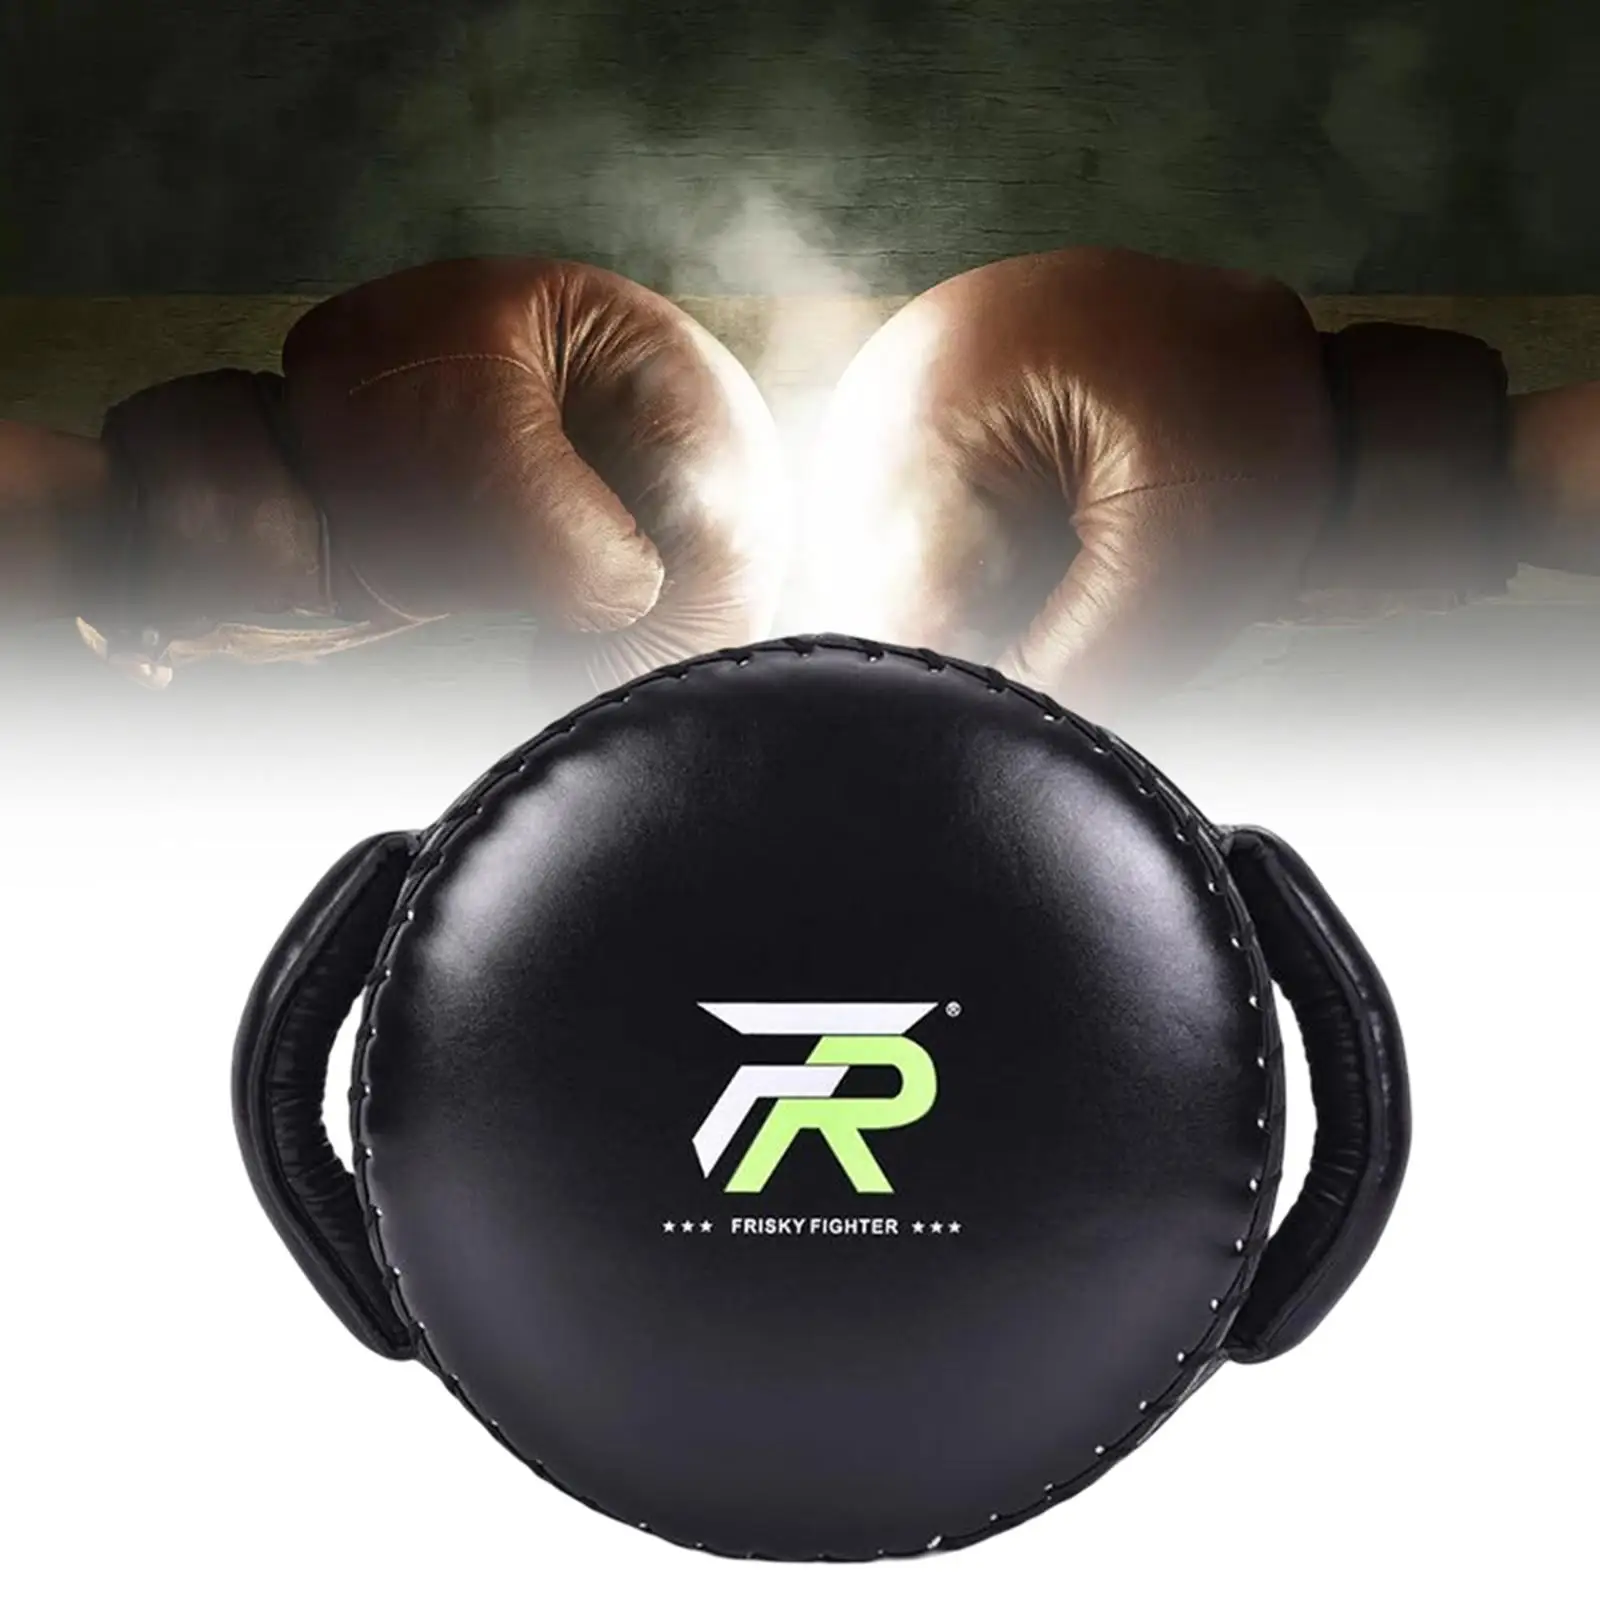 PU Leather Boxing Pads Breathable Focus Pad Punch Bag Sparring Pad Strike Pad for Competition Taekwondo Kickboxing Women Men Mma